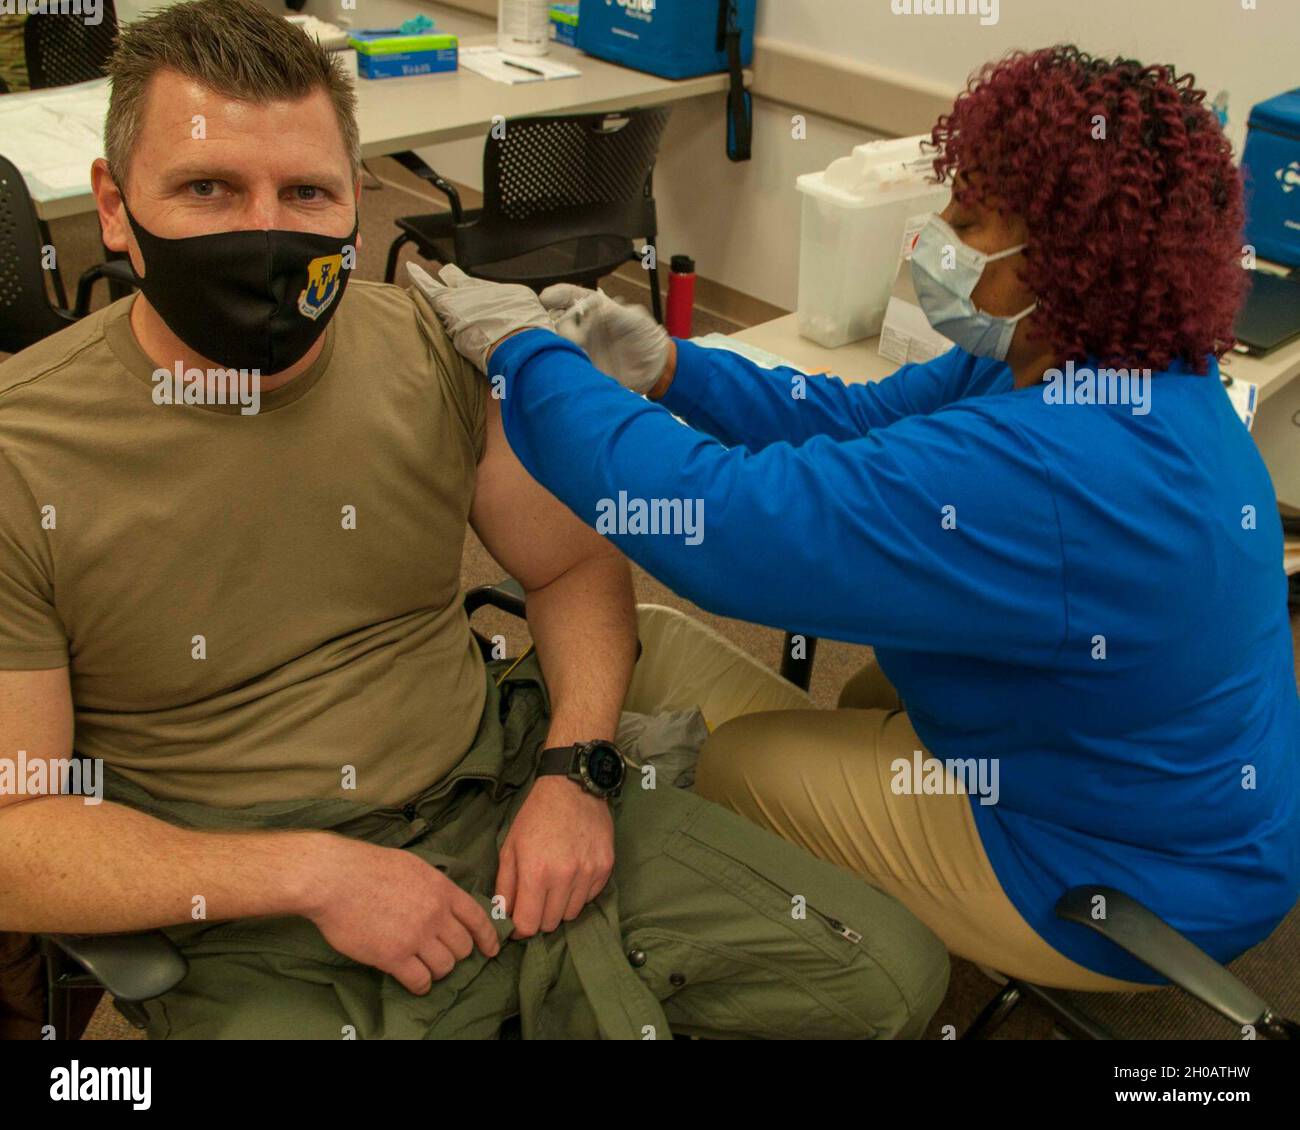 U.S. Air Force Lt. Col. David Schur, commander, 43rd Operations Support Squadron, receives the first round of the COVID-19 vaccine at Womack Army Medical Center Jan. 13, 2021. #MHSVaccine Stock Photo